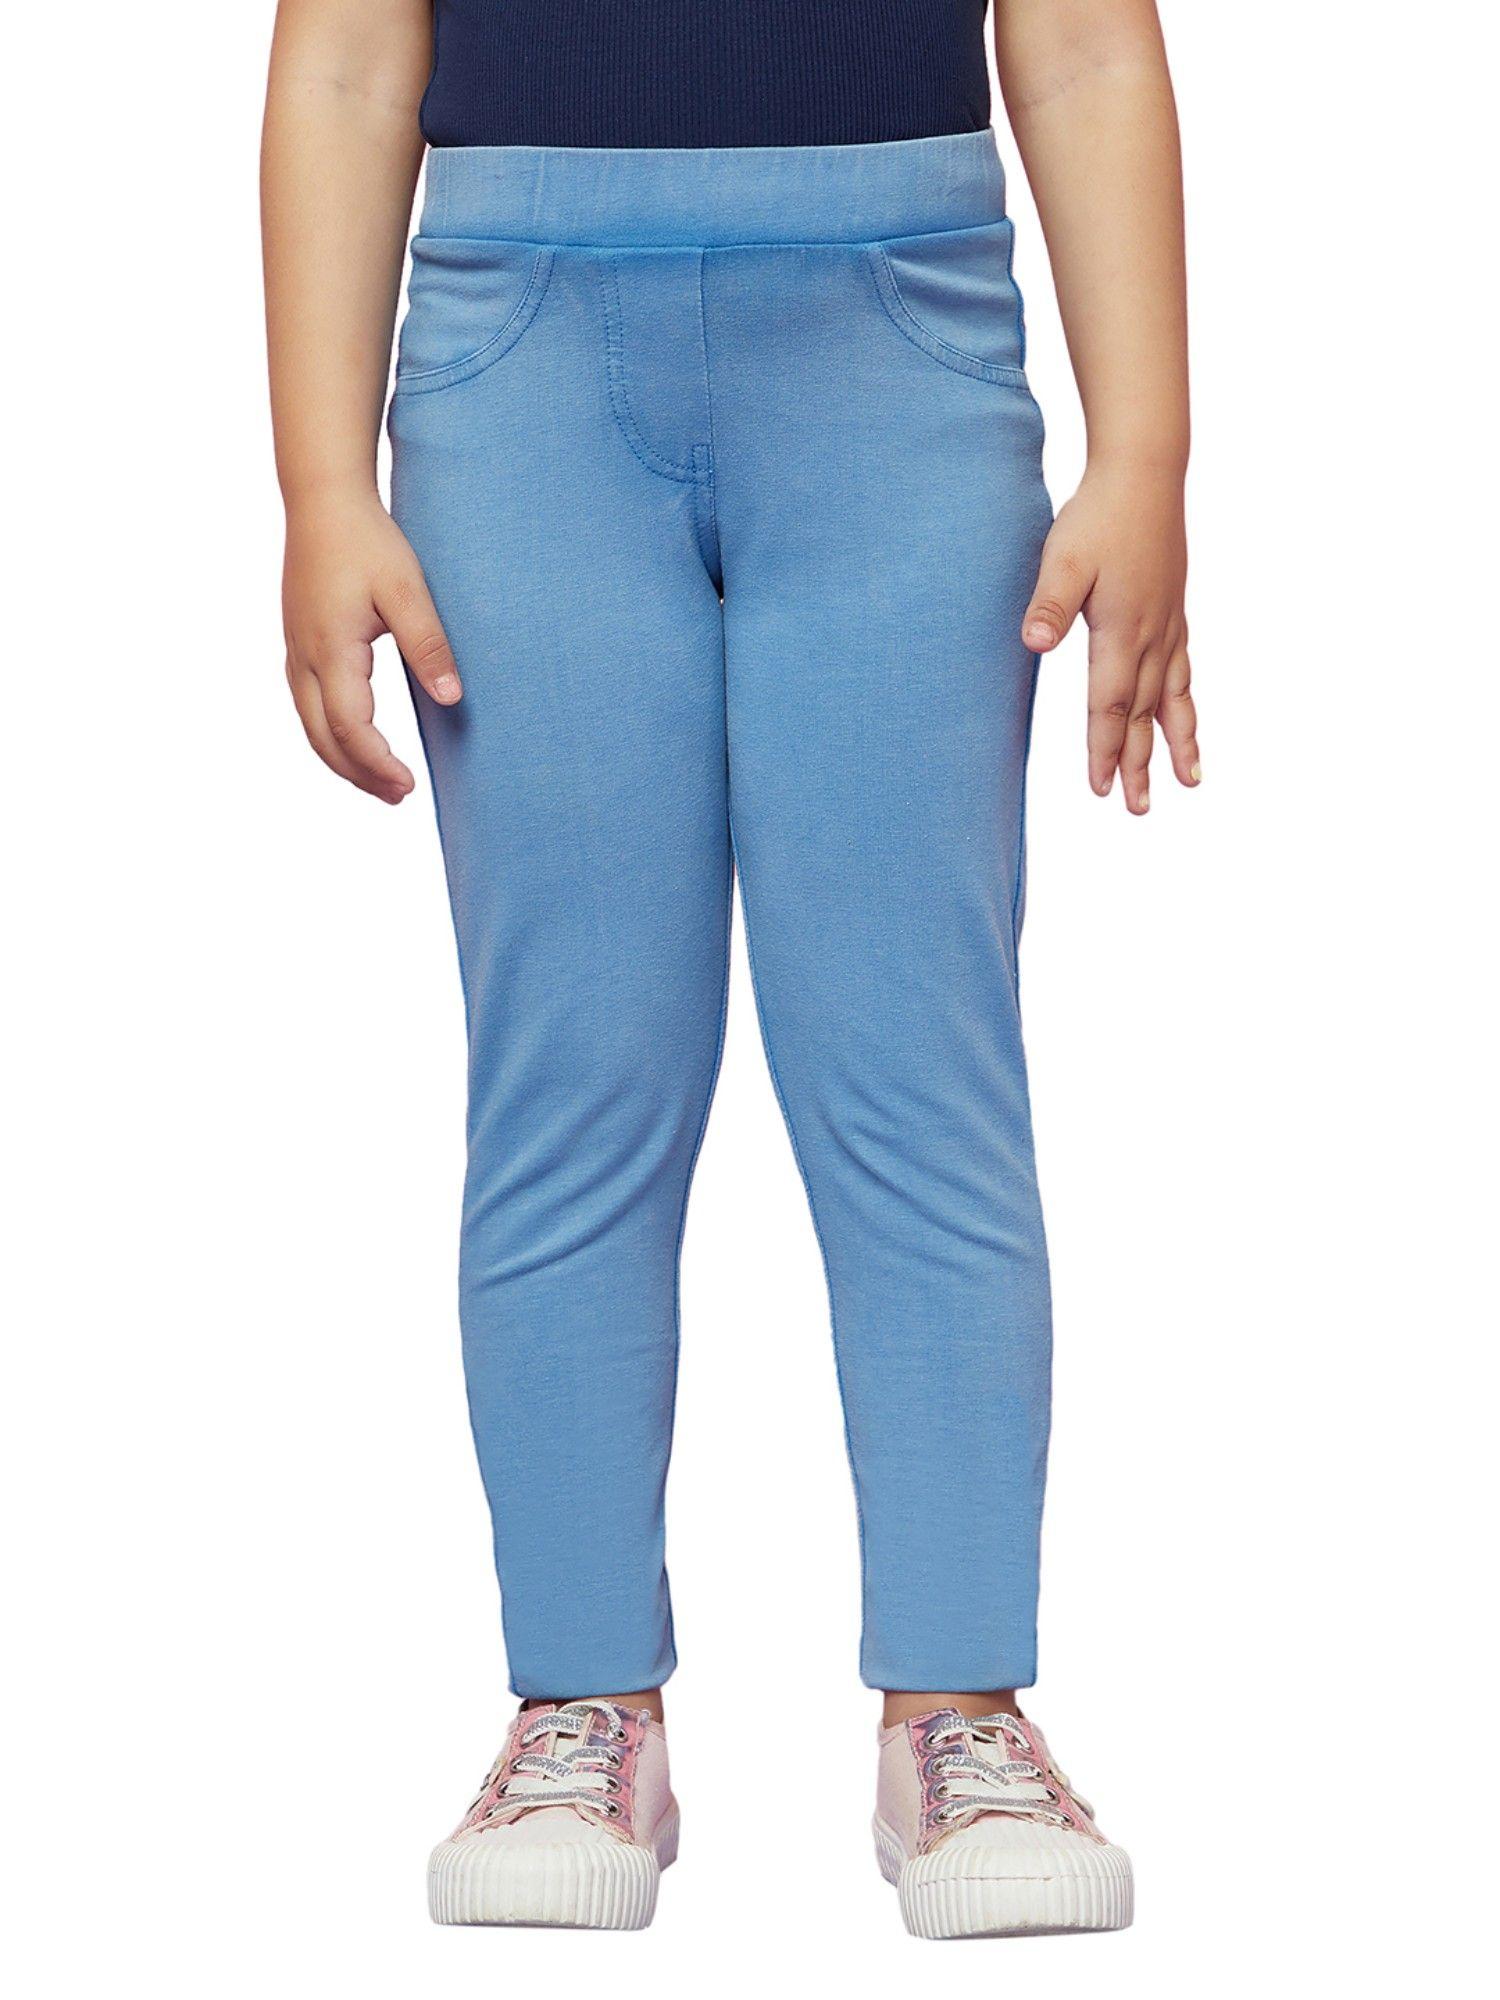 classic-blue-legging-over-washed-blue